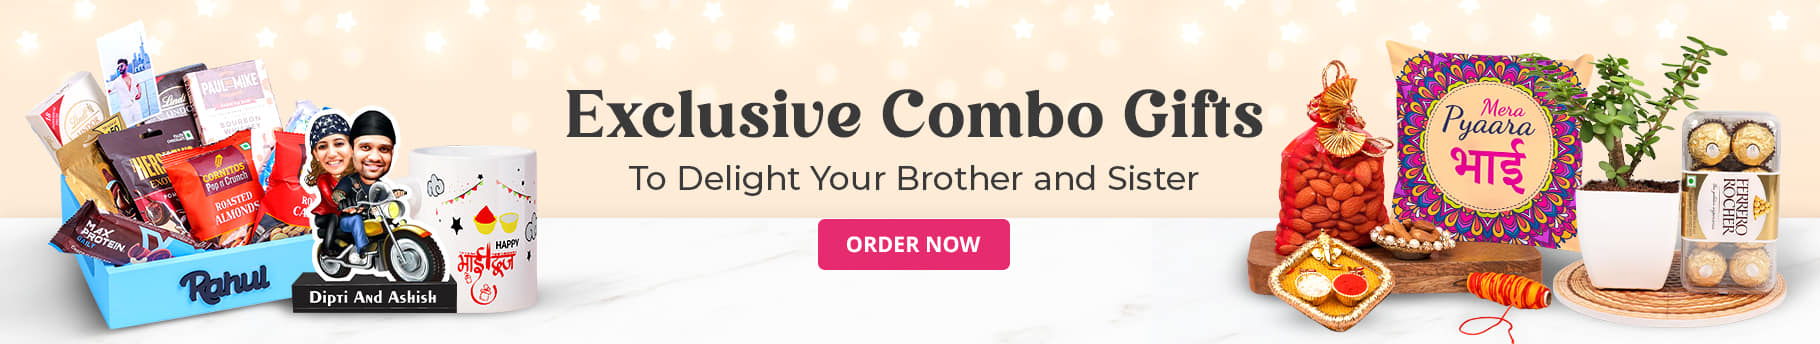 Exclusive Combo Gifts